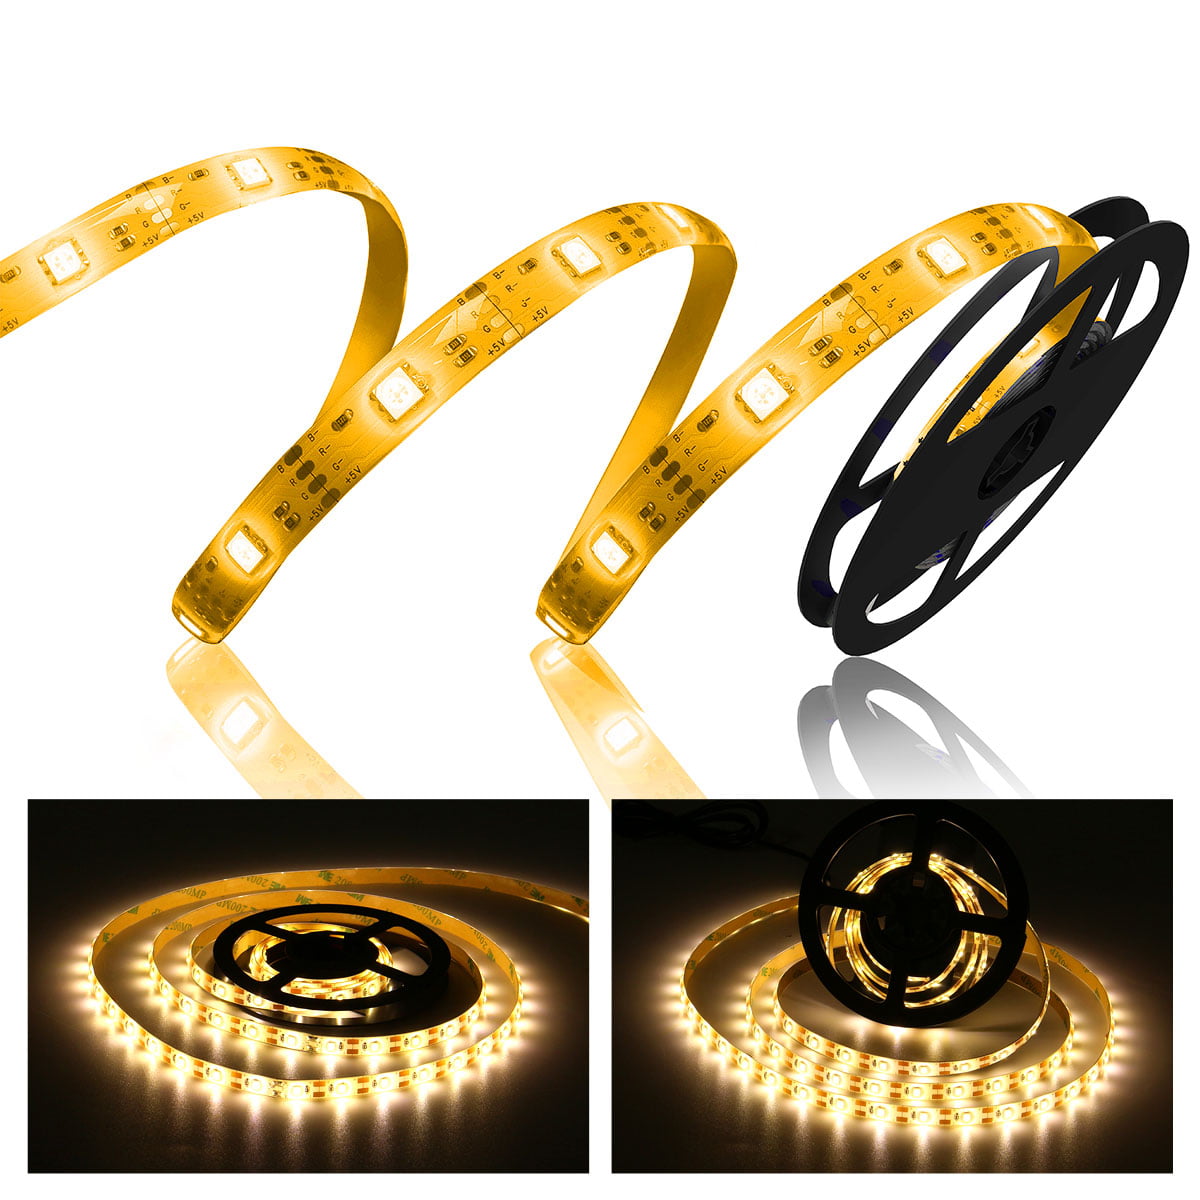 Warm White Led Battery Operated Strip 1M Ideal Scenary Lights Dolls House 